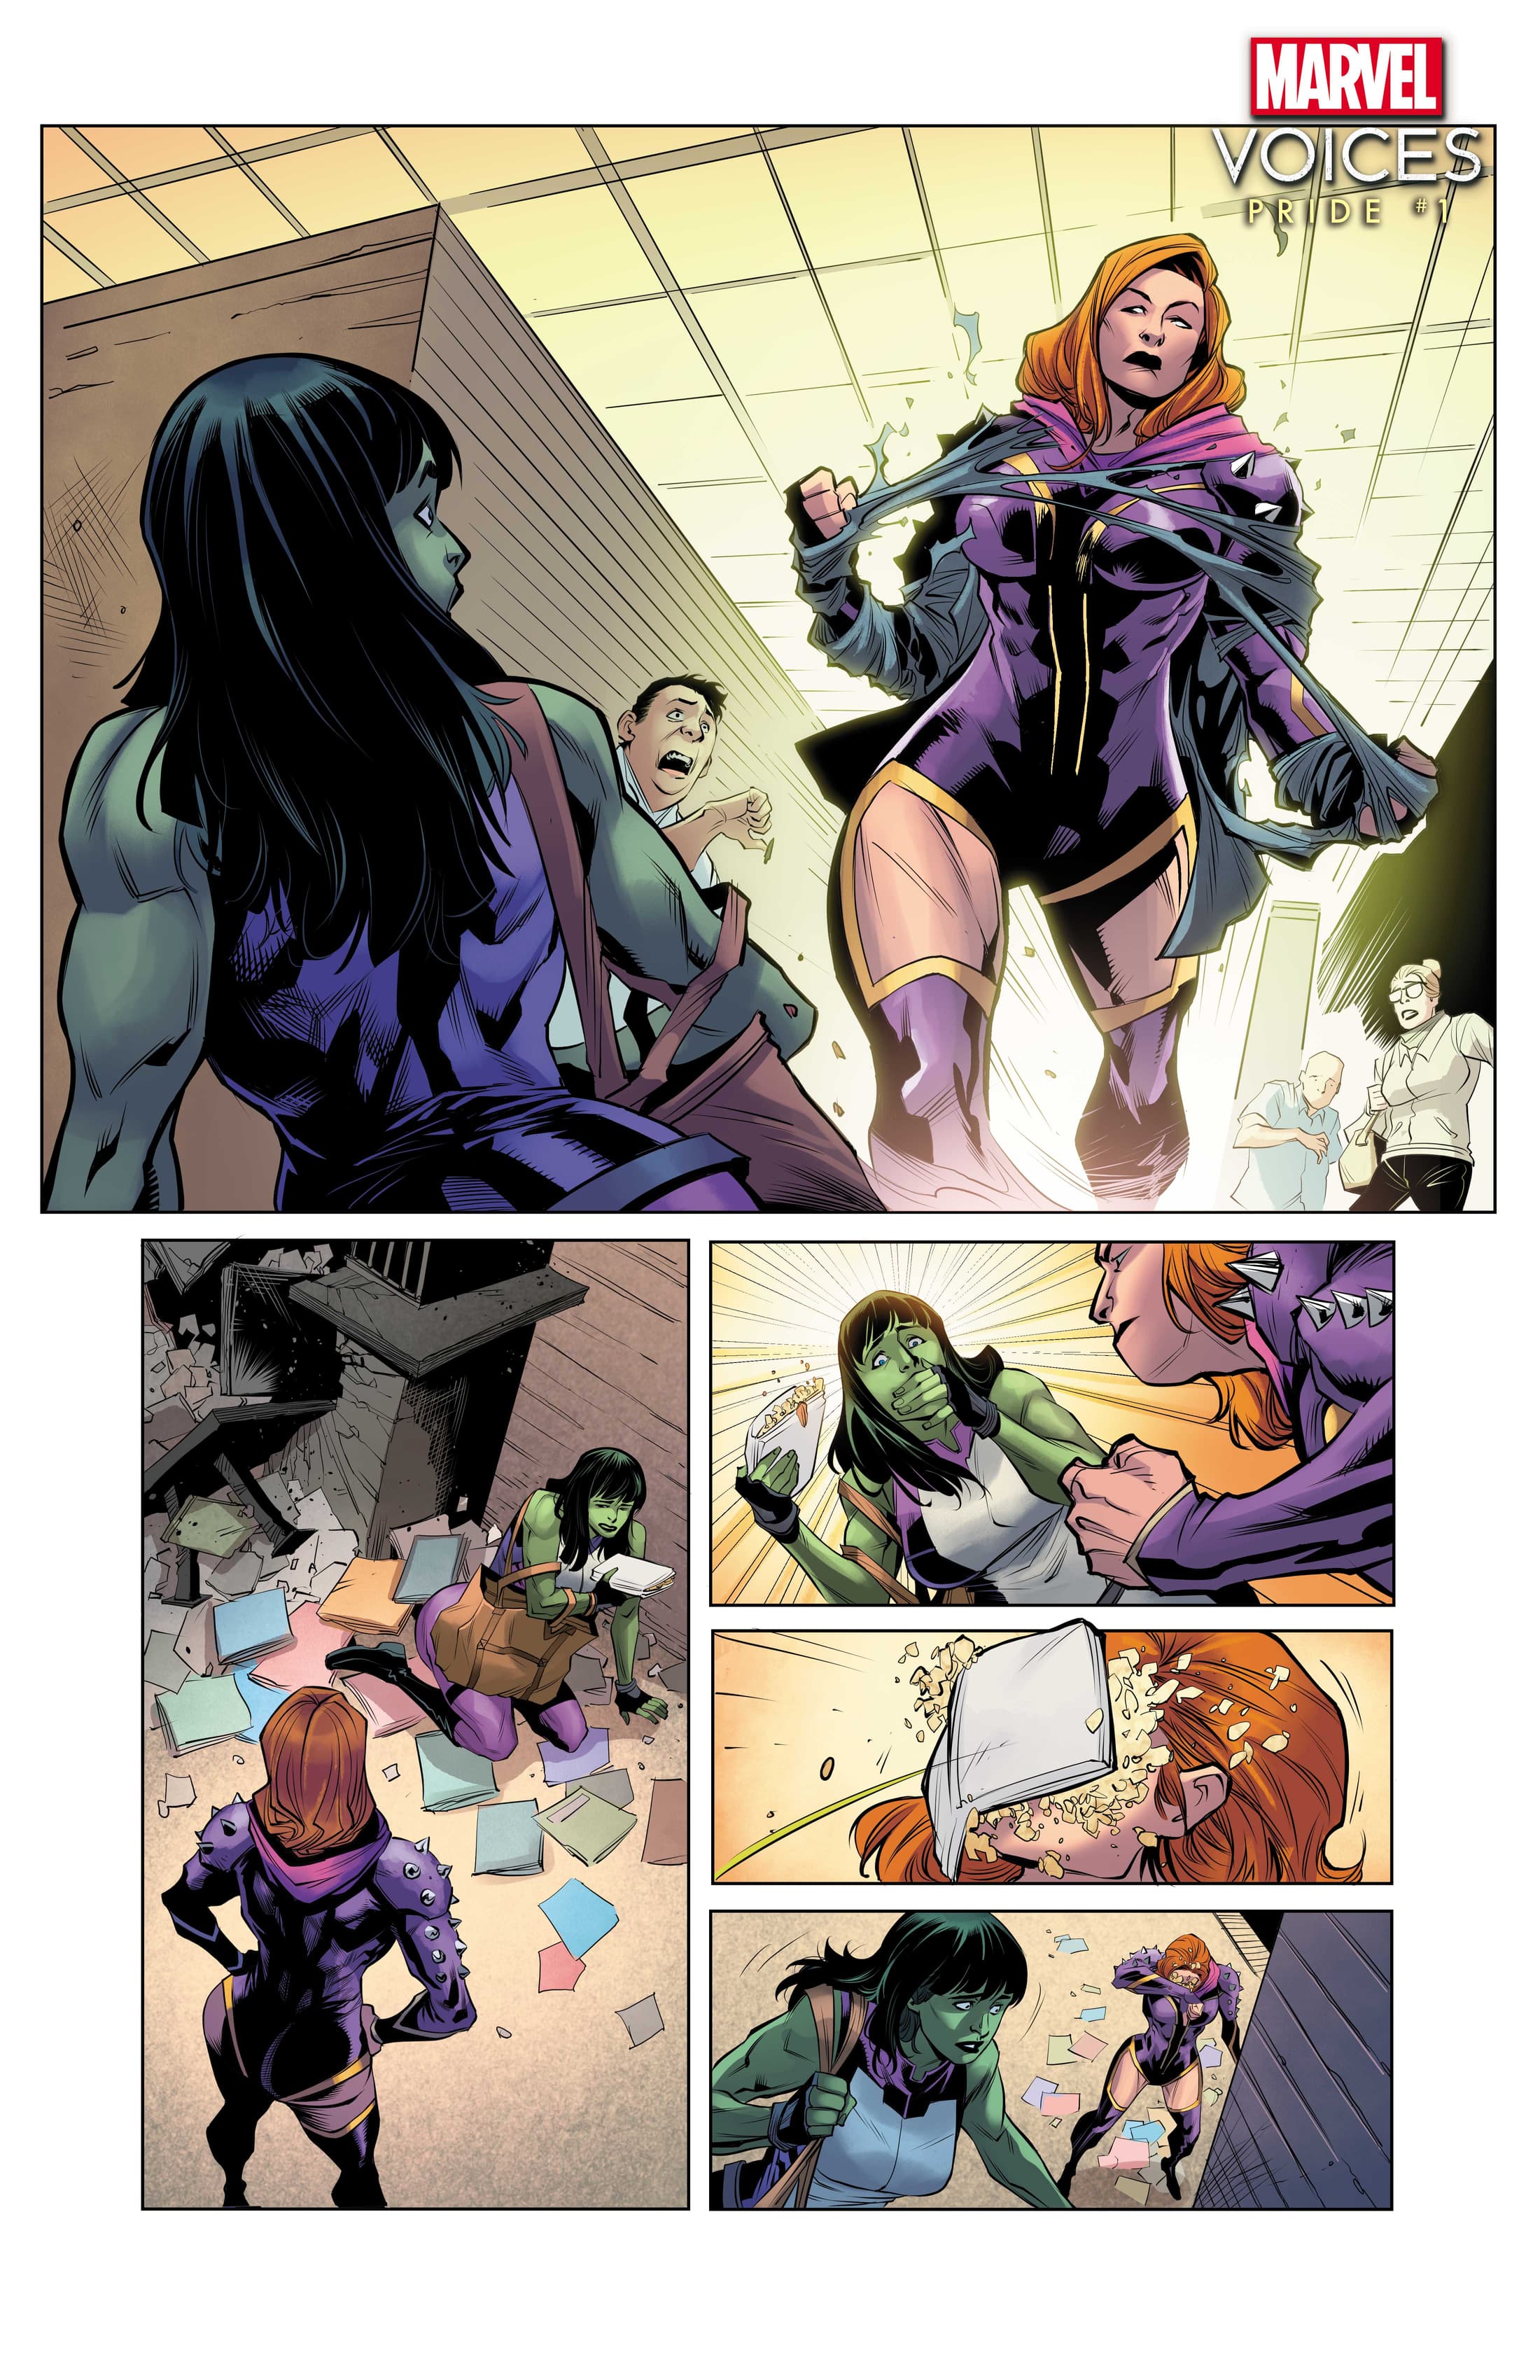 MARVEL'S VOICES: PRIDE #1 preview art by Jethro Morales, colors by Rachelle Rosenberg